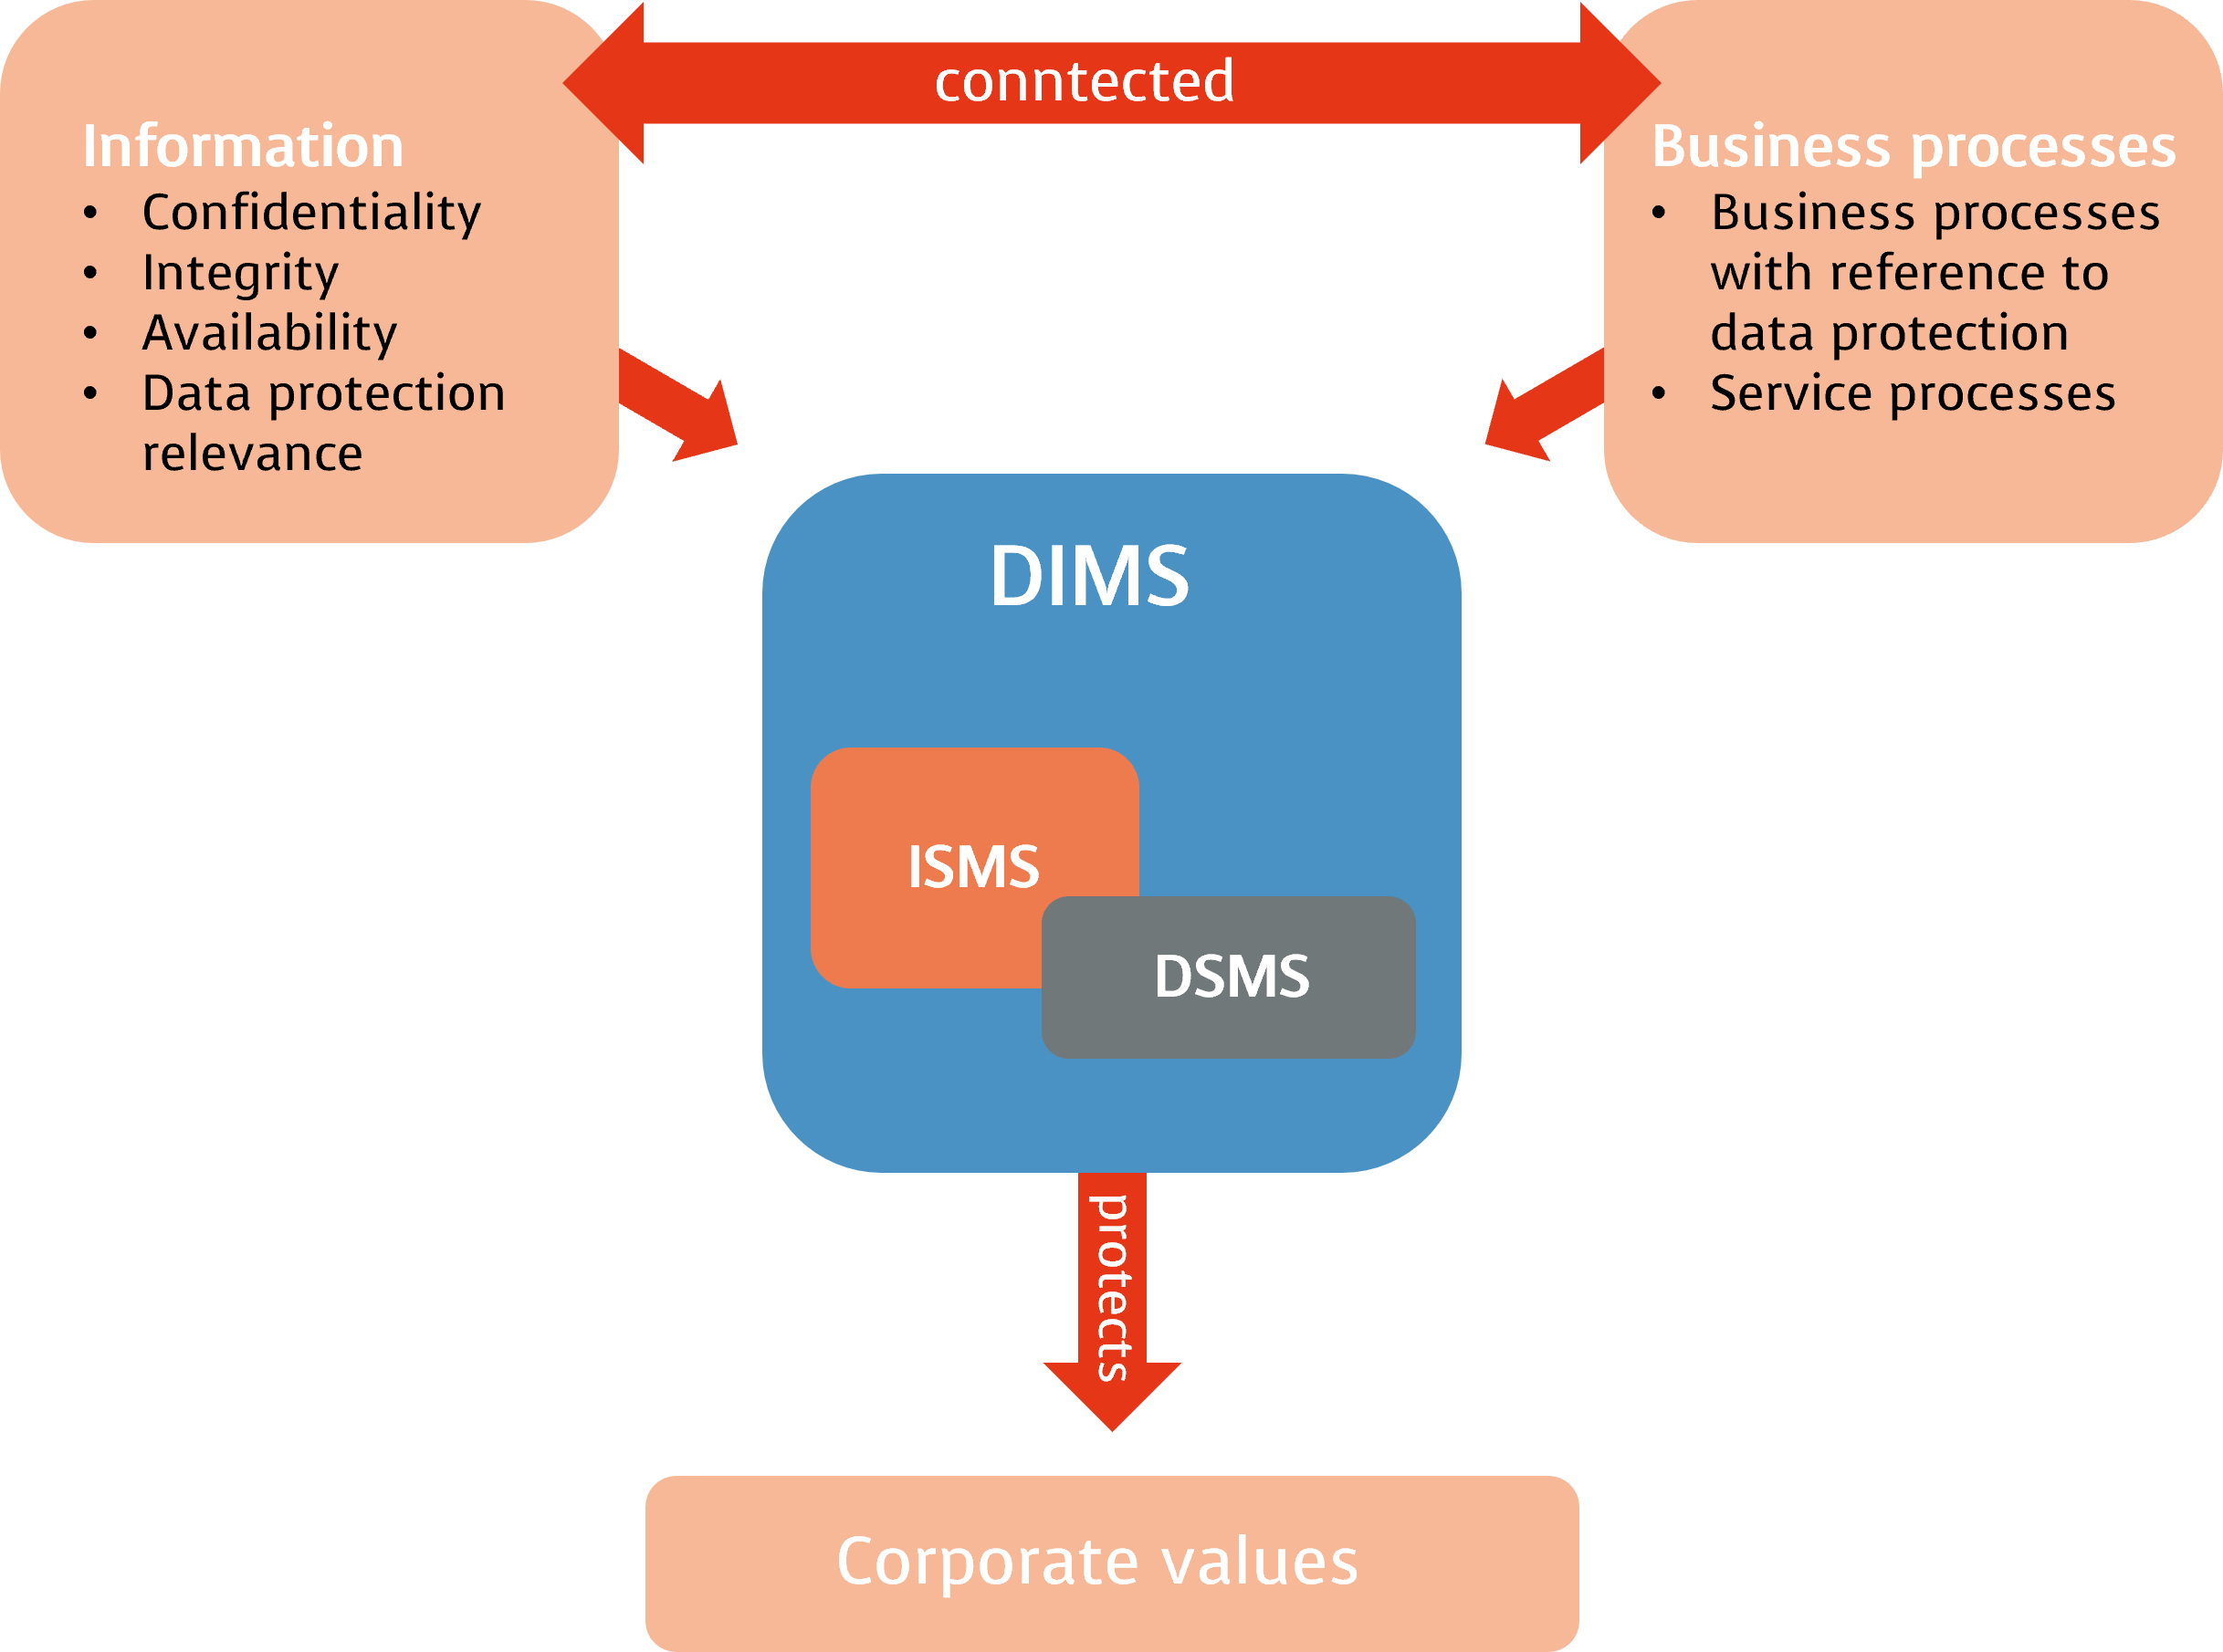 Connection between DPMS and ISMS